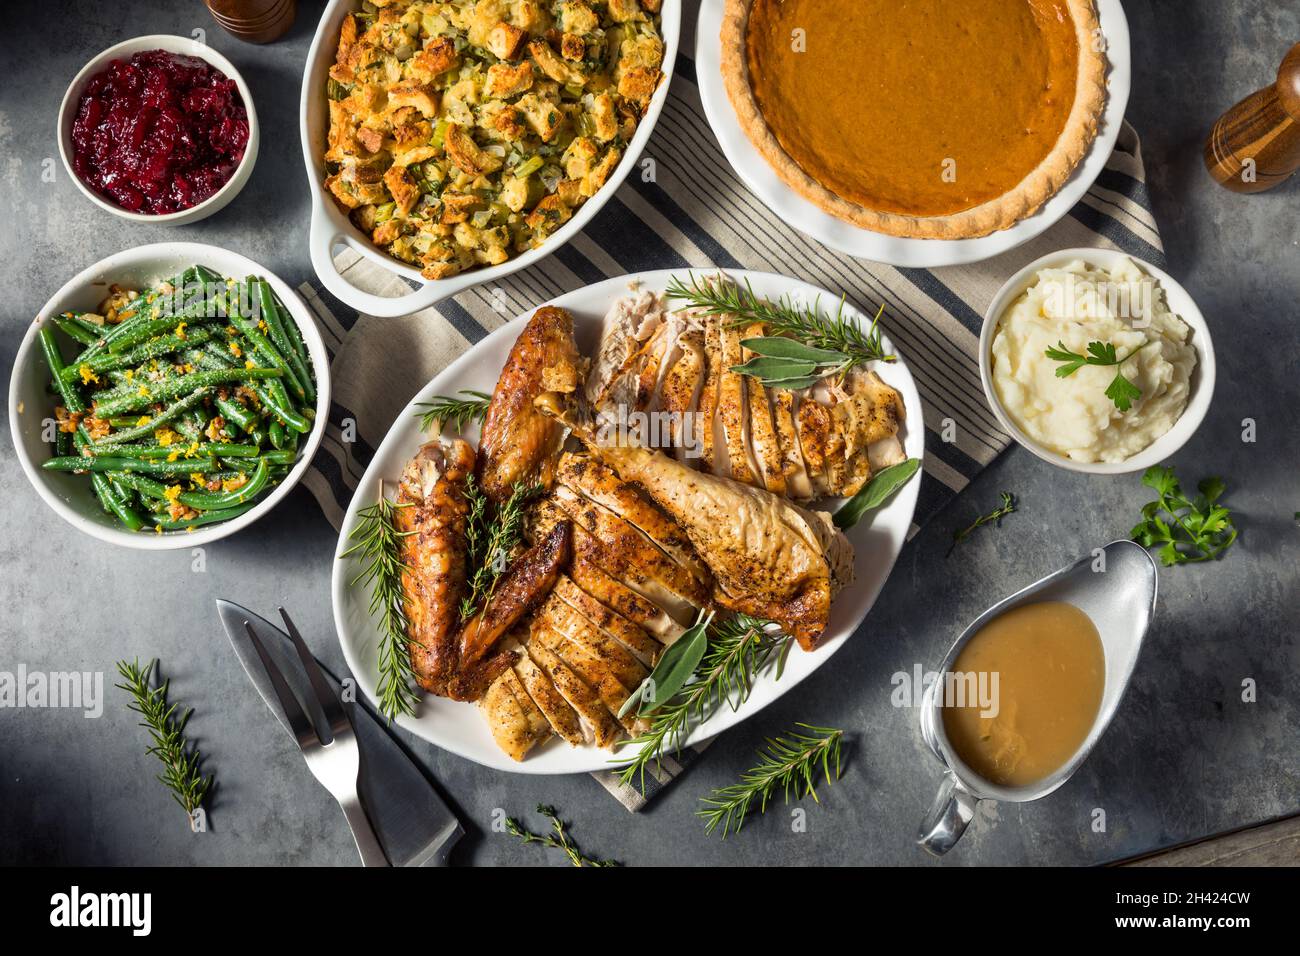 Festive Thanksgiving Day Turkey Dinner with Stuffing Pumpkin PIe and Potatoes Stock Photo